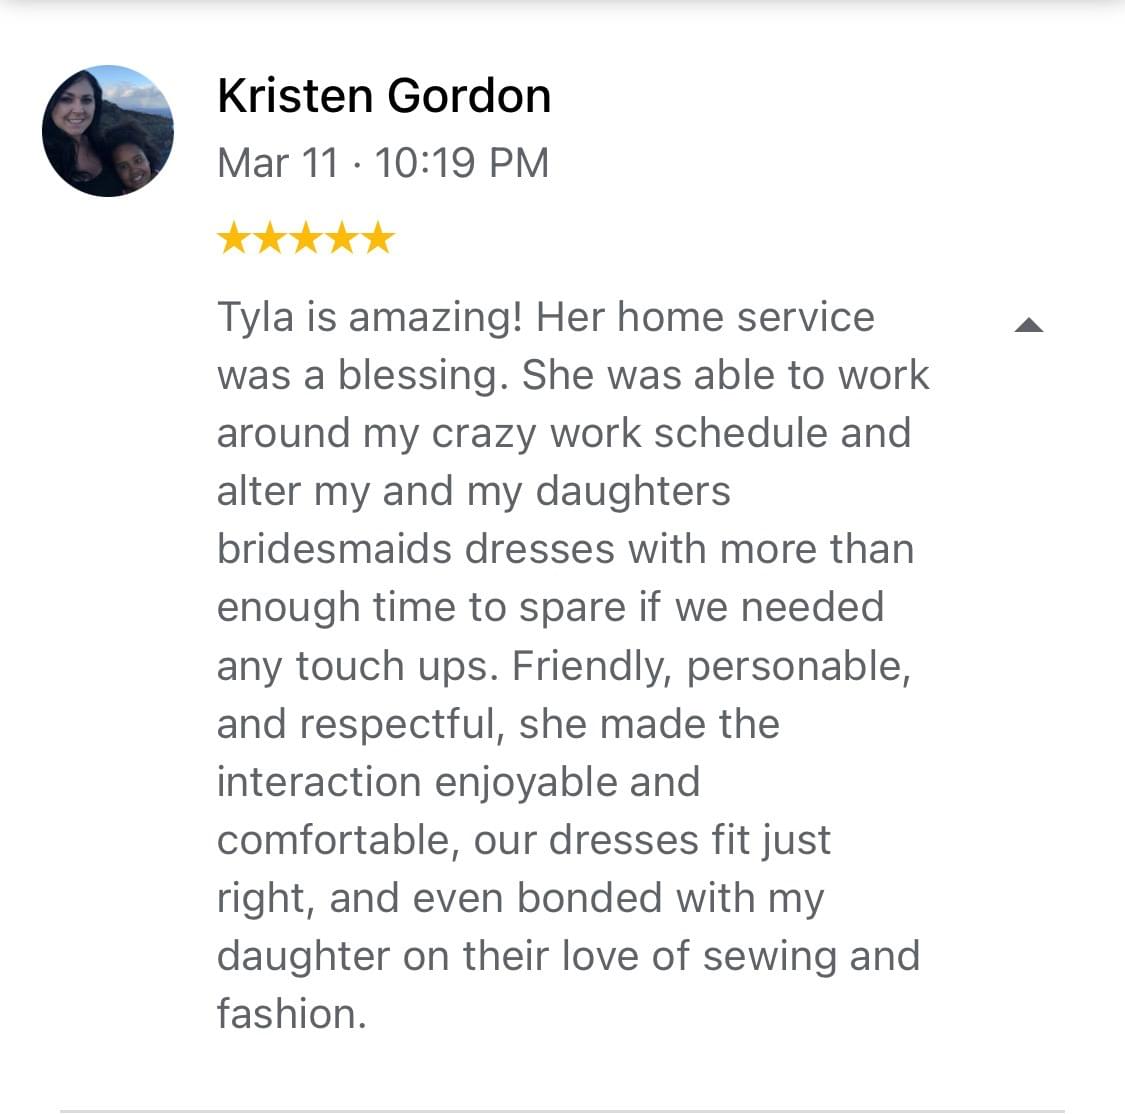 Google review by Kristen, one of tylas bride. She was so happy and grateful for tyla.